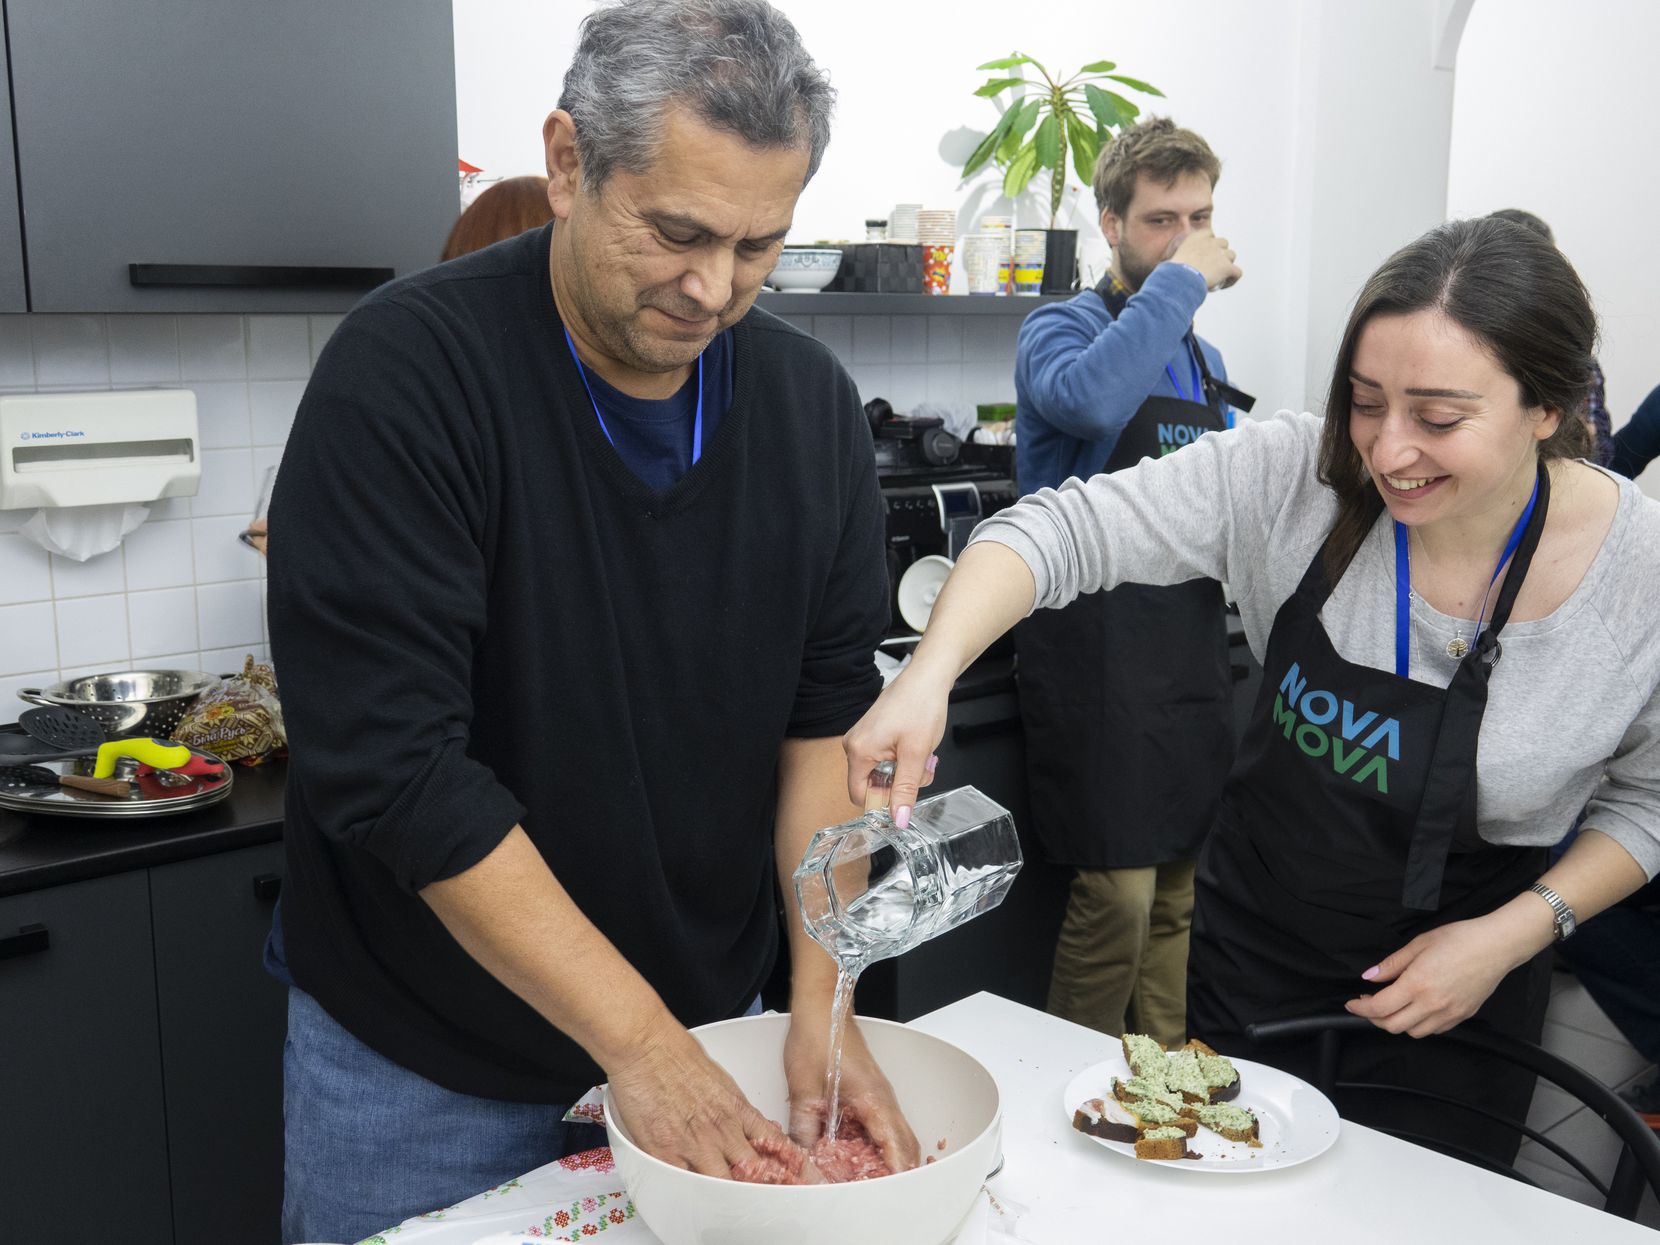 Tom Sanchez (left) cooks for a class assignment with a classmate in Kiev, Ukraine, before...